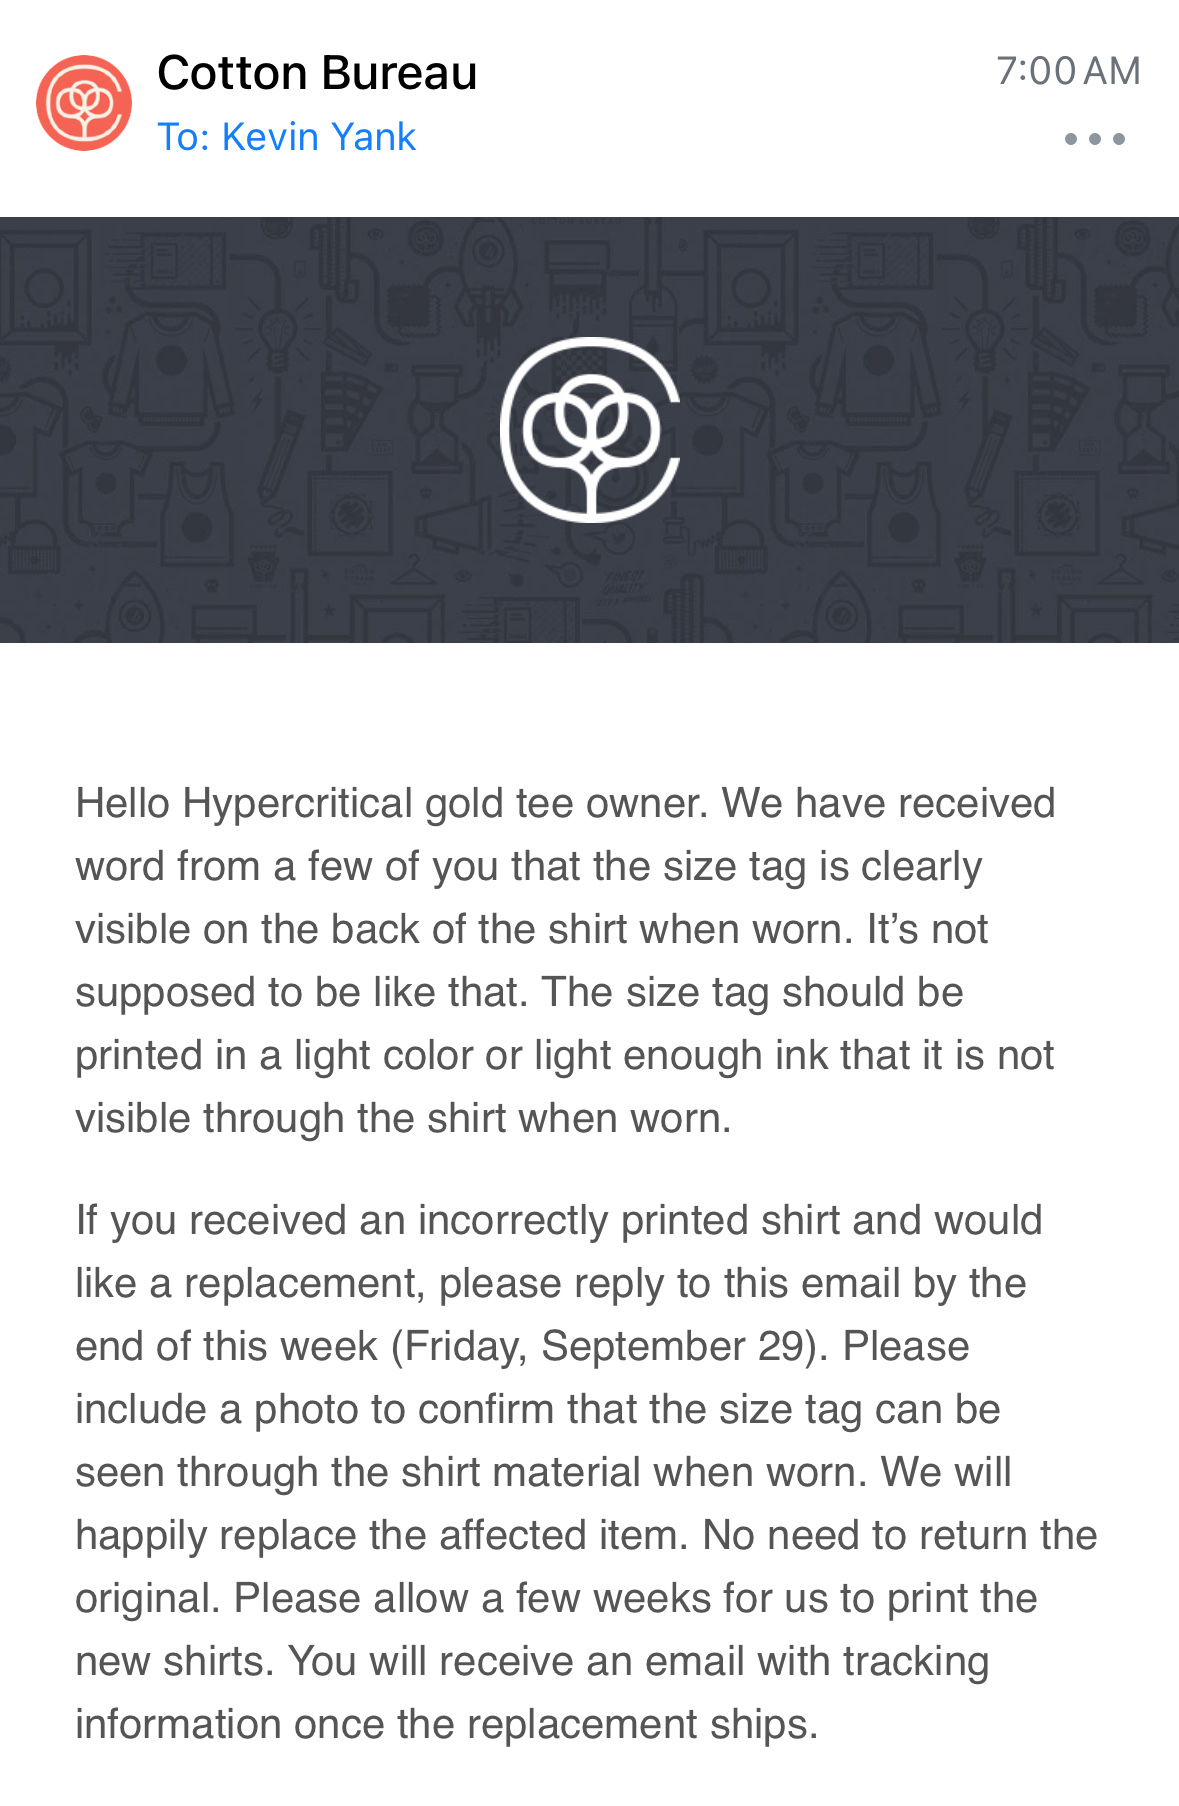 Email screenshot:
  
  Hello Hypercritical gold tee owner. We have received word from a few of you that the size tag is clearly visible on the back of the shirt when worn. It’s not supposed to be like that. The size tag should be printed in a light color or light enough ink that it is not visible through the shirt when worn.
  
  If you received an incorrectly printed shirt and would like a replacement, please reply to this email by the end of this week (Friday, September 29). Please include a photo to confirm that the size tag can be seen through the shirt material when worn. We will happily replace the affected item. No need to return the original. Please allow a few weeks for us to print the new shirts. You will receive an email with tracking information once the replacement ships.